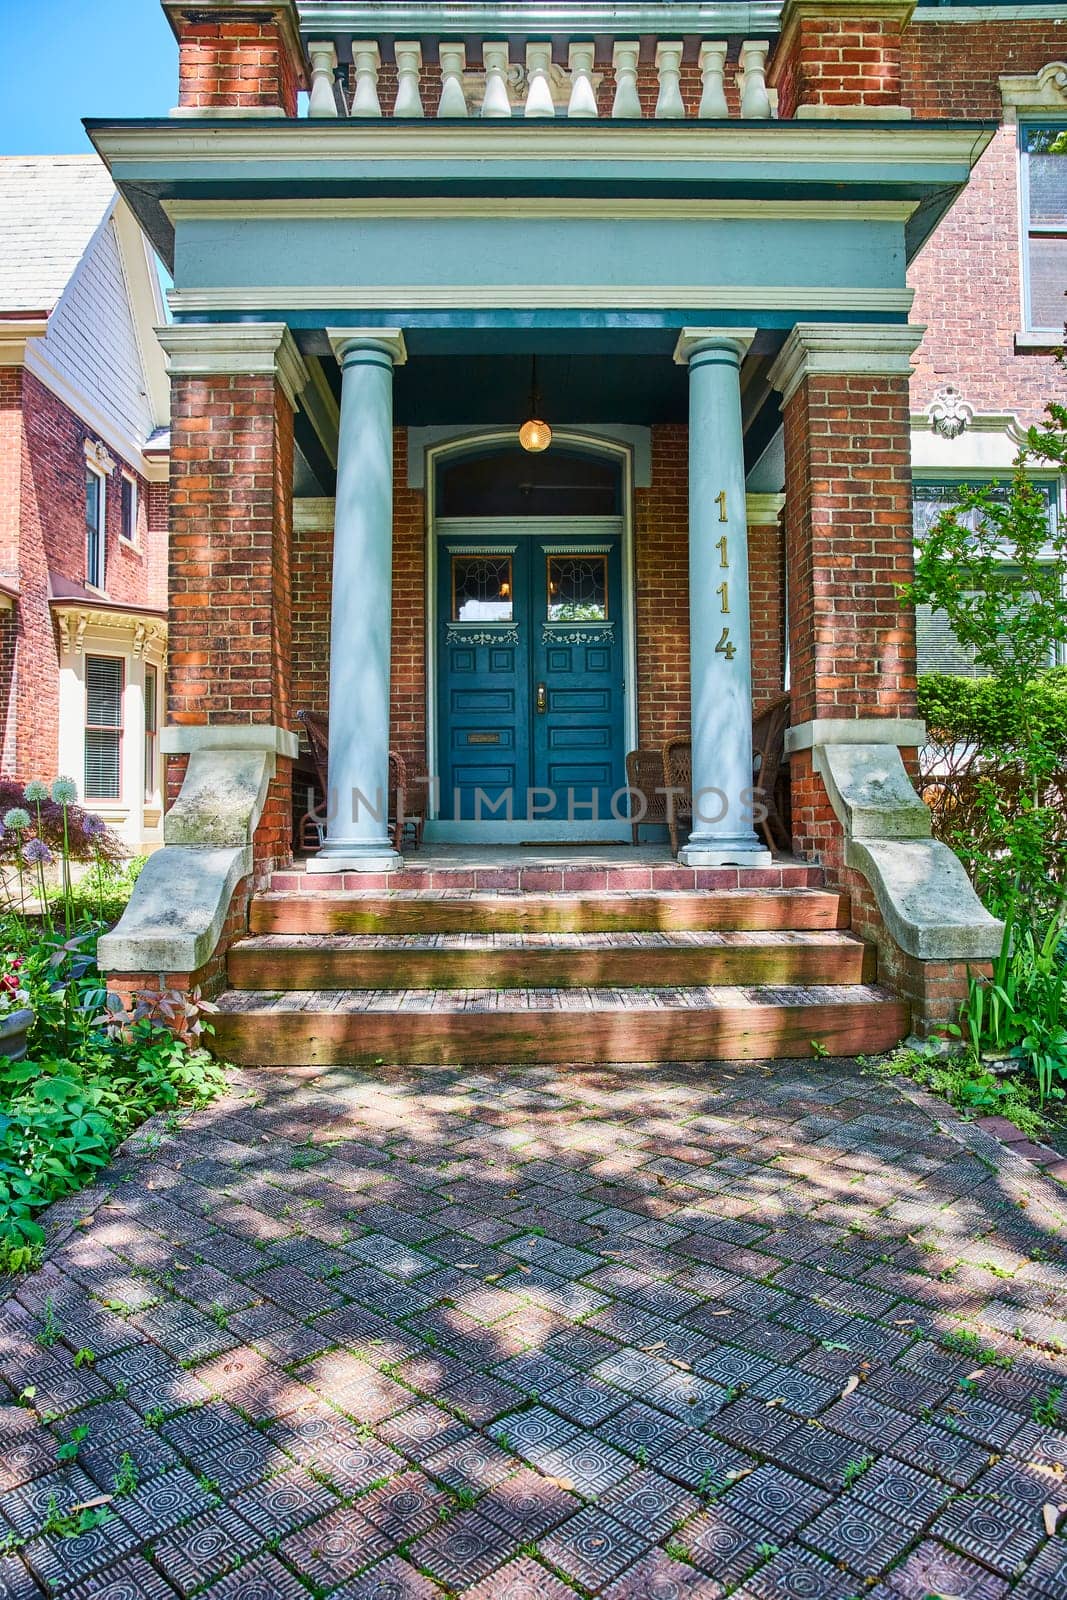 Traditional brick house with elegant porch in Fort Wayne, bathed in sunlight, evokes warmth and hospitality.